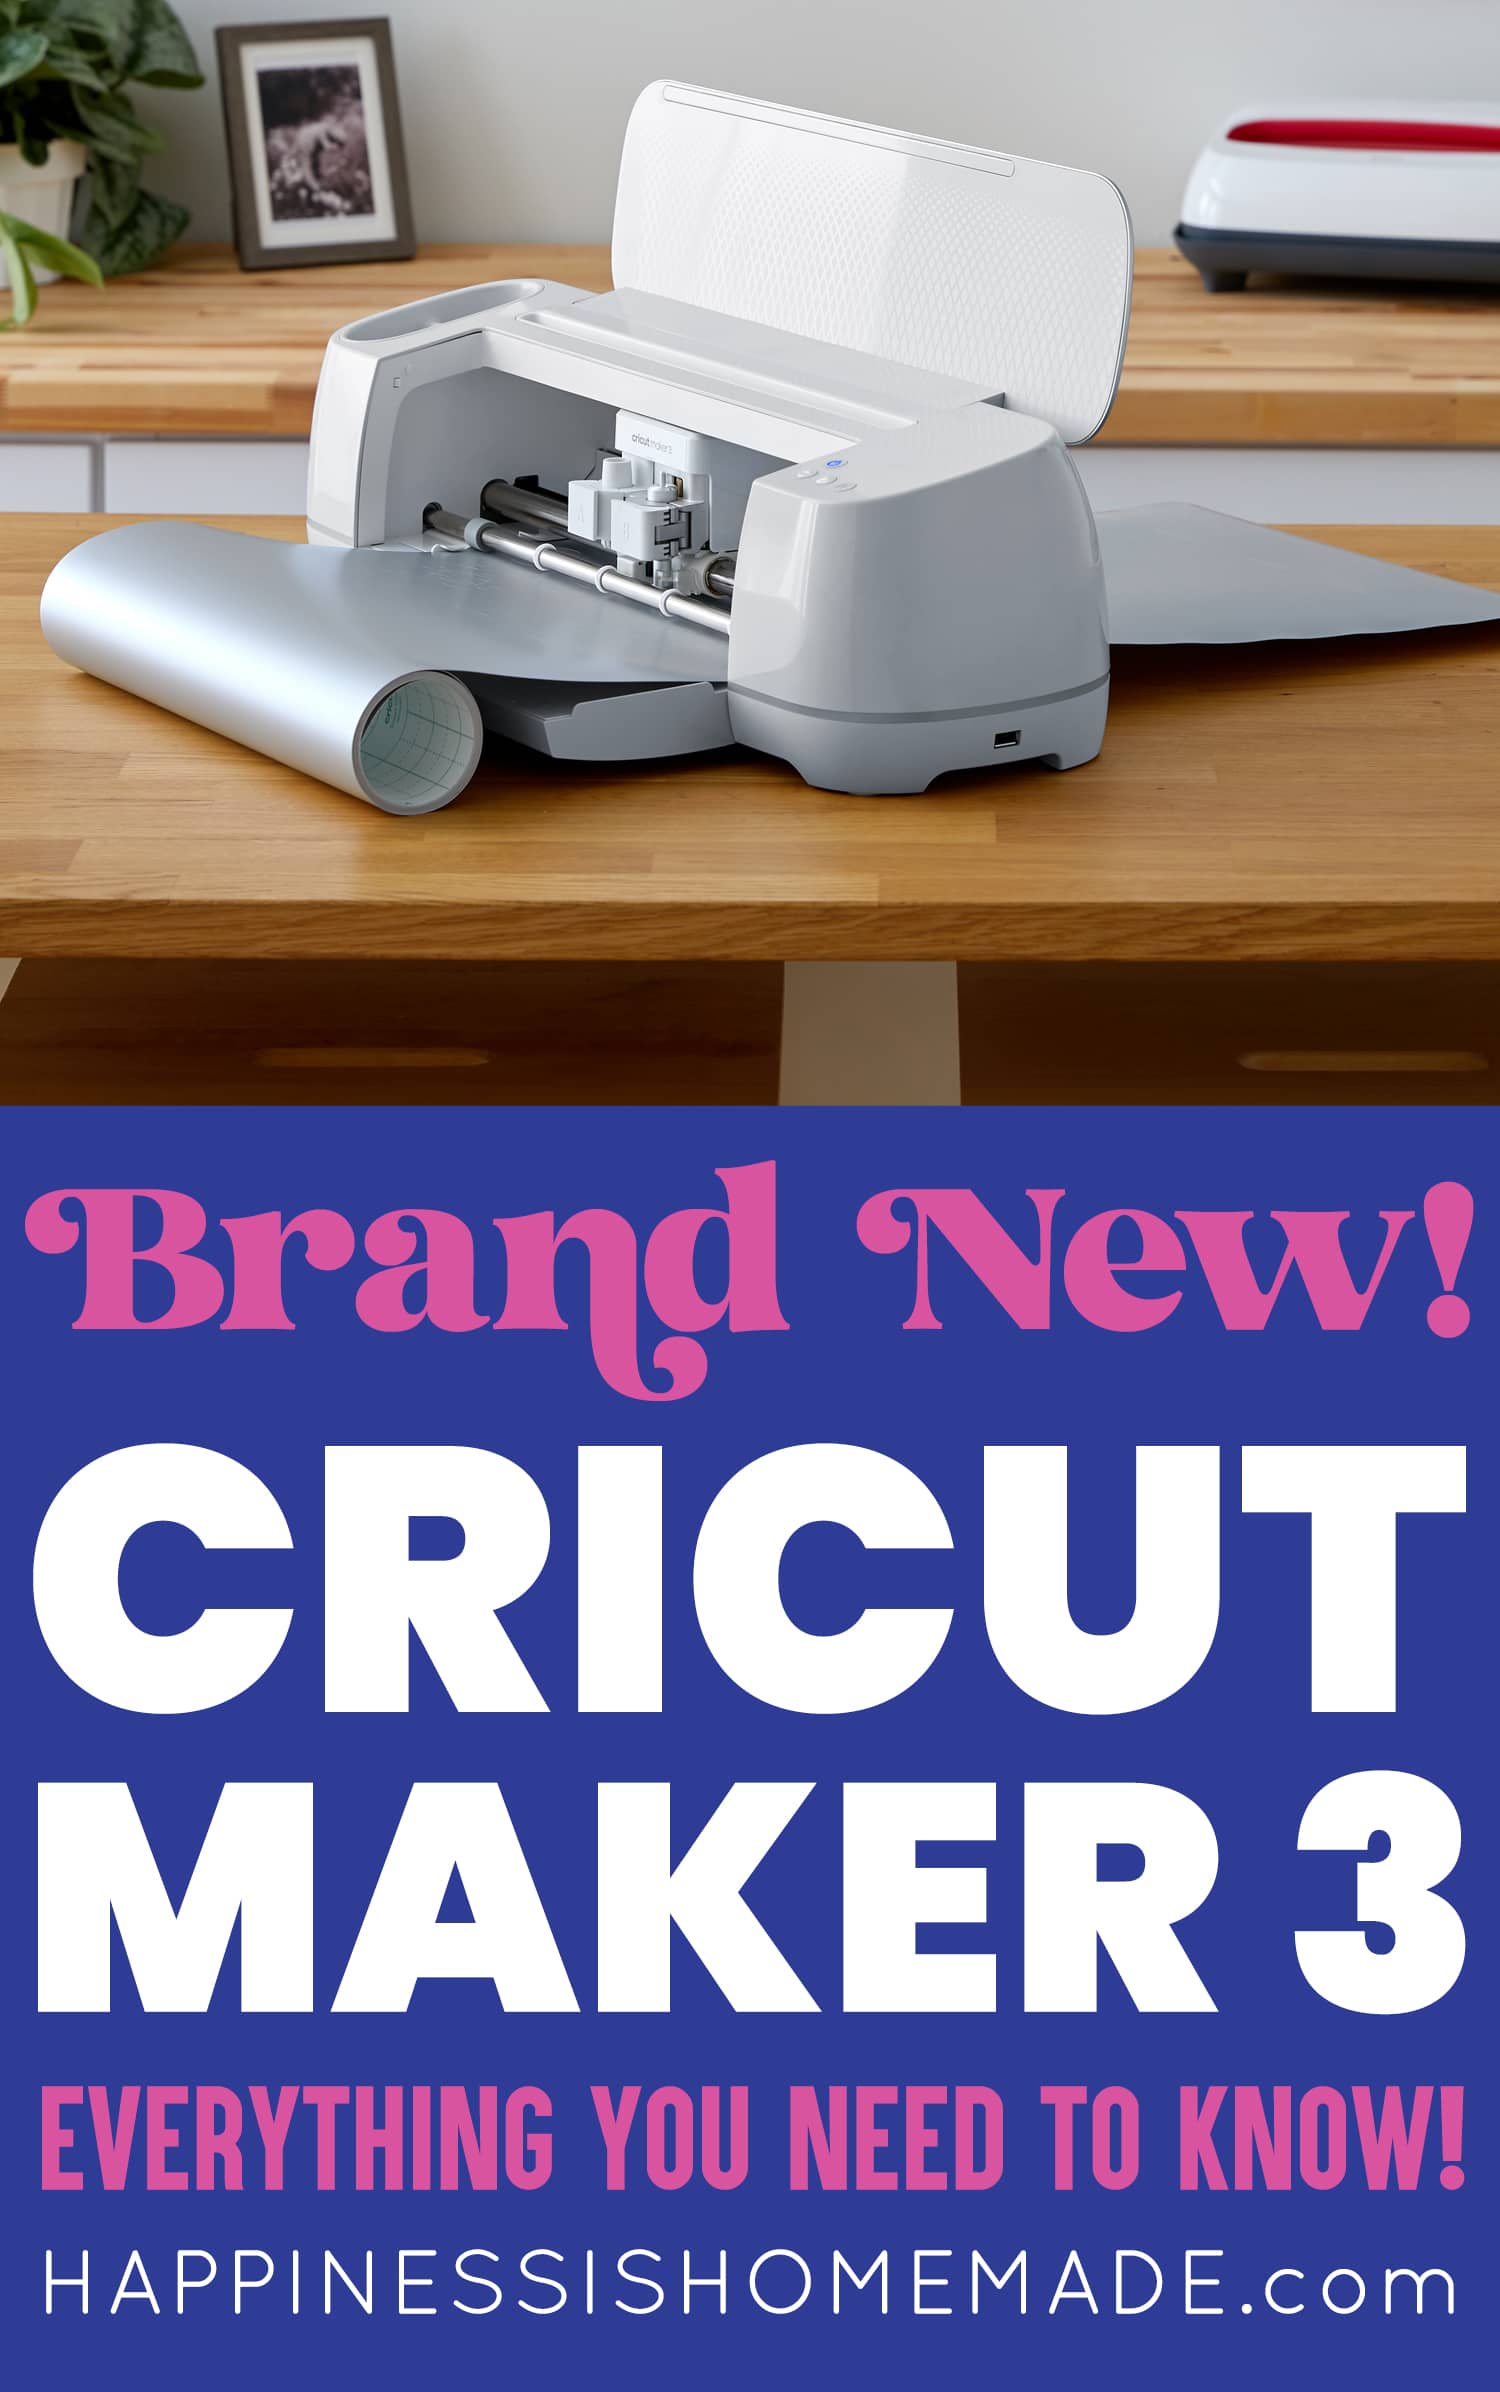 Make more with the Cricut Maker 3